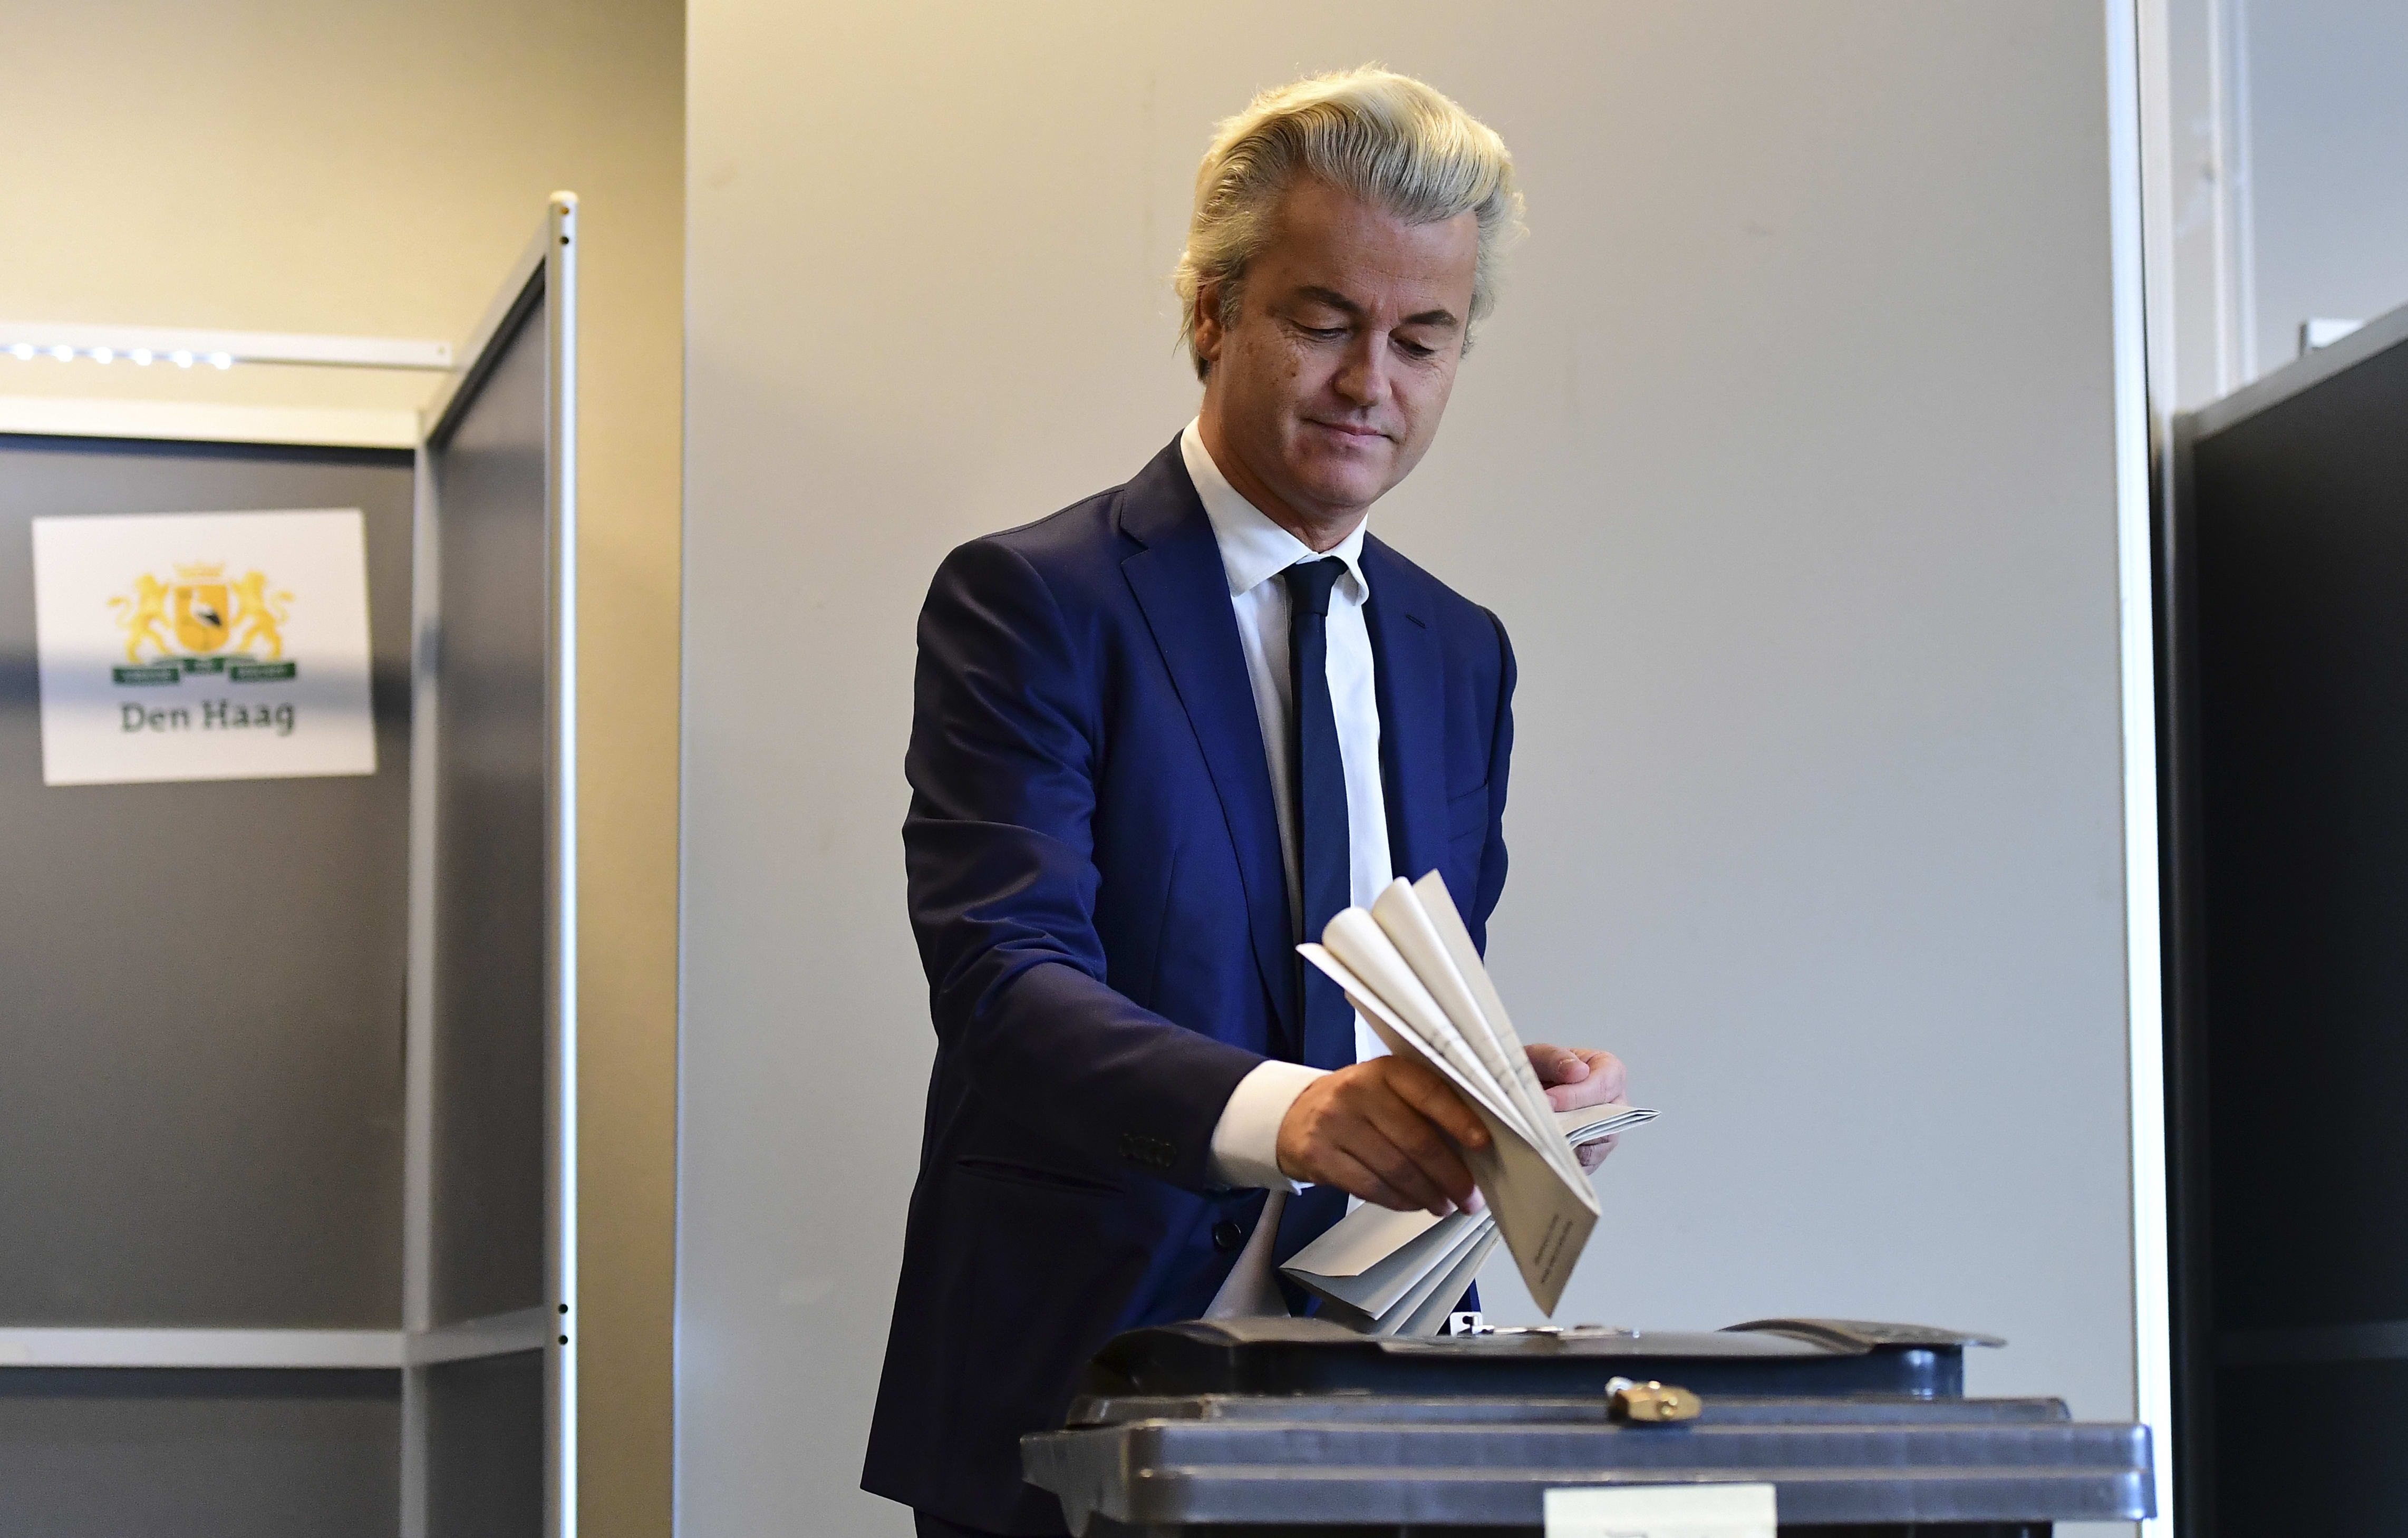 Geert Wilders of the Freedom Party (PVV) casts his vote at a polling station in The Hague.